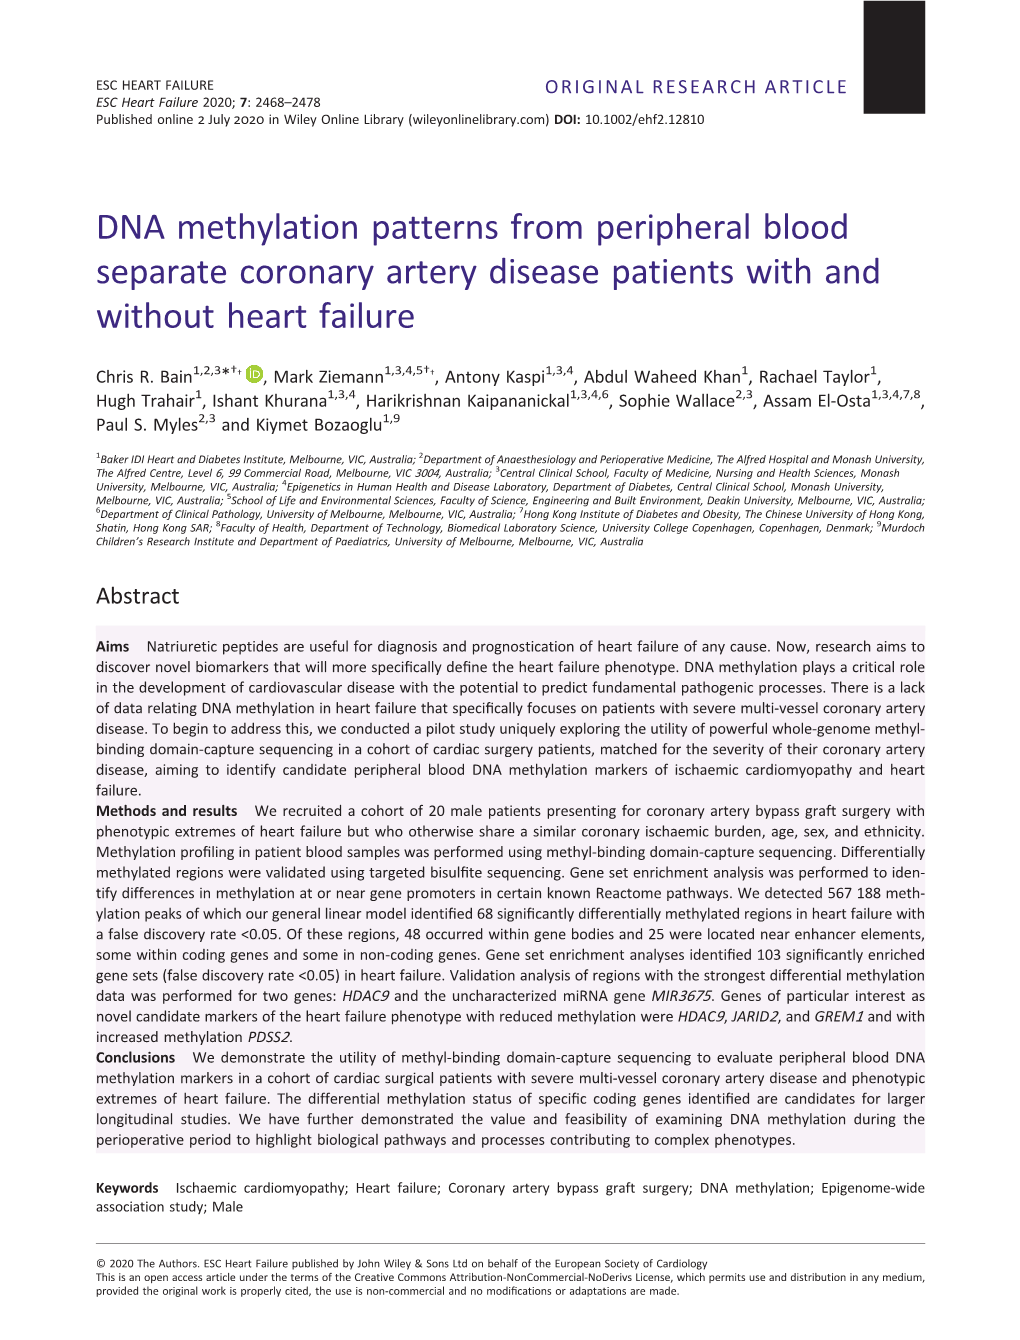 DNA Methylation Patterns from Peripheral Blood Separate Coronary Artery Disease Patients with and Without Heart Failure